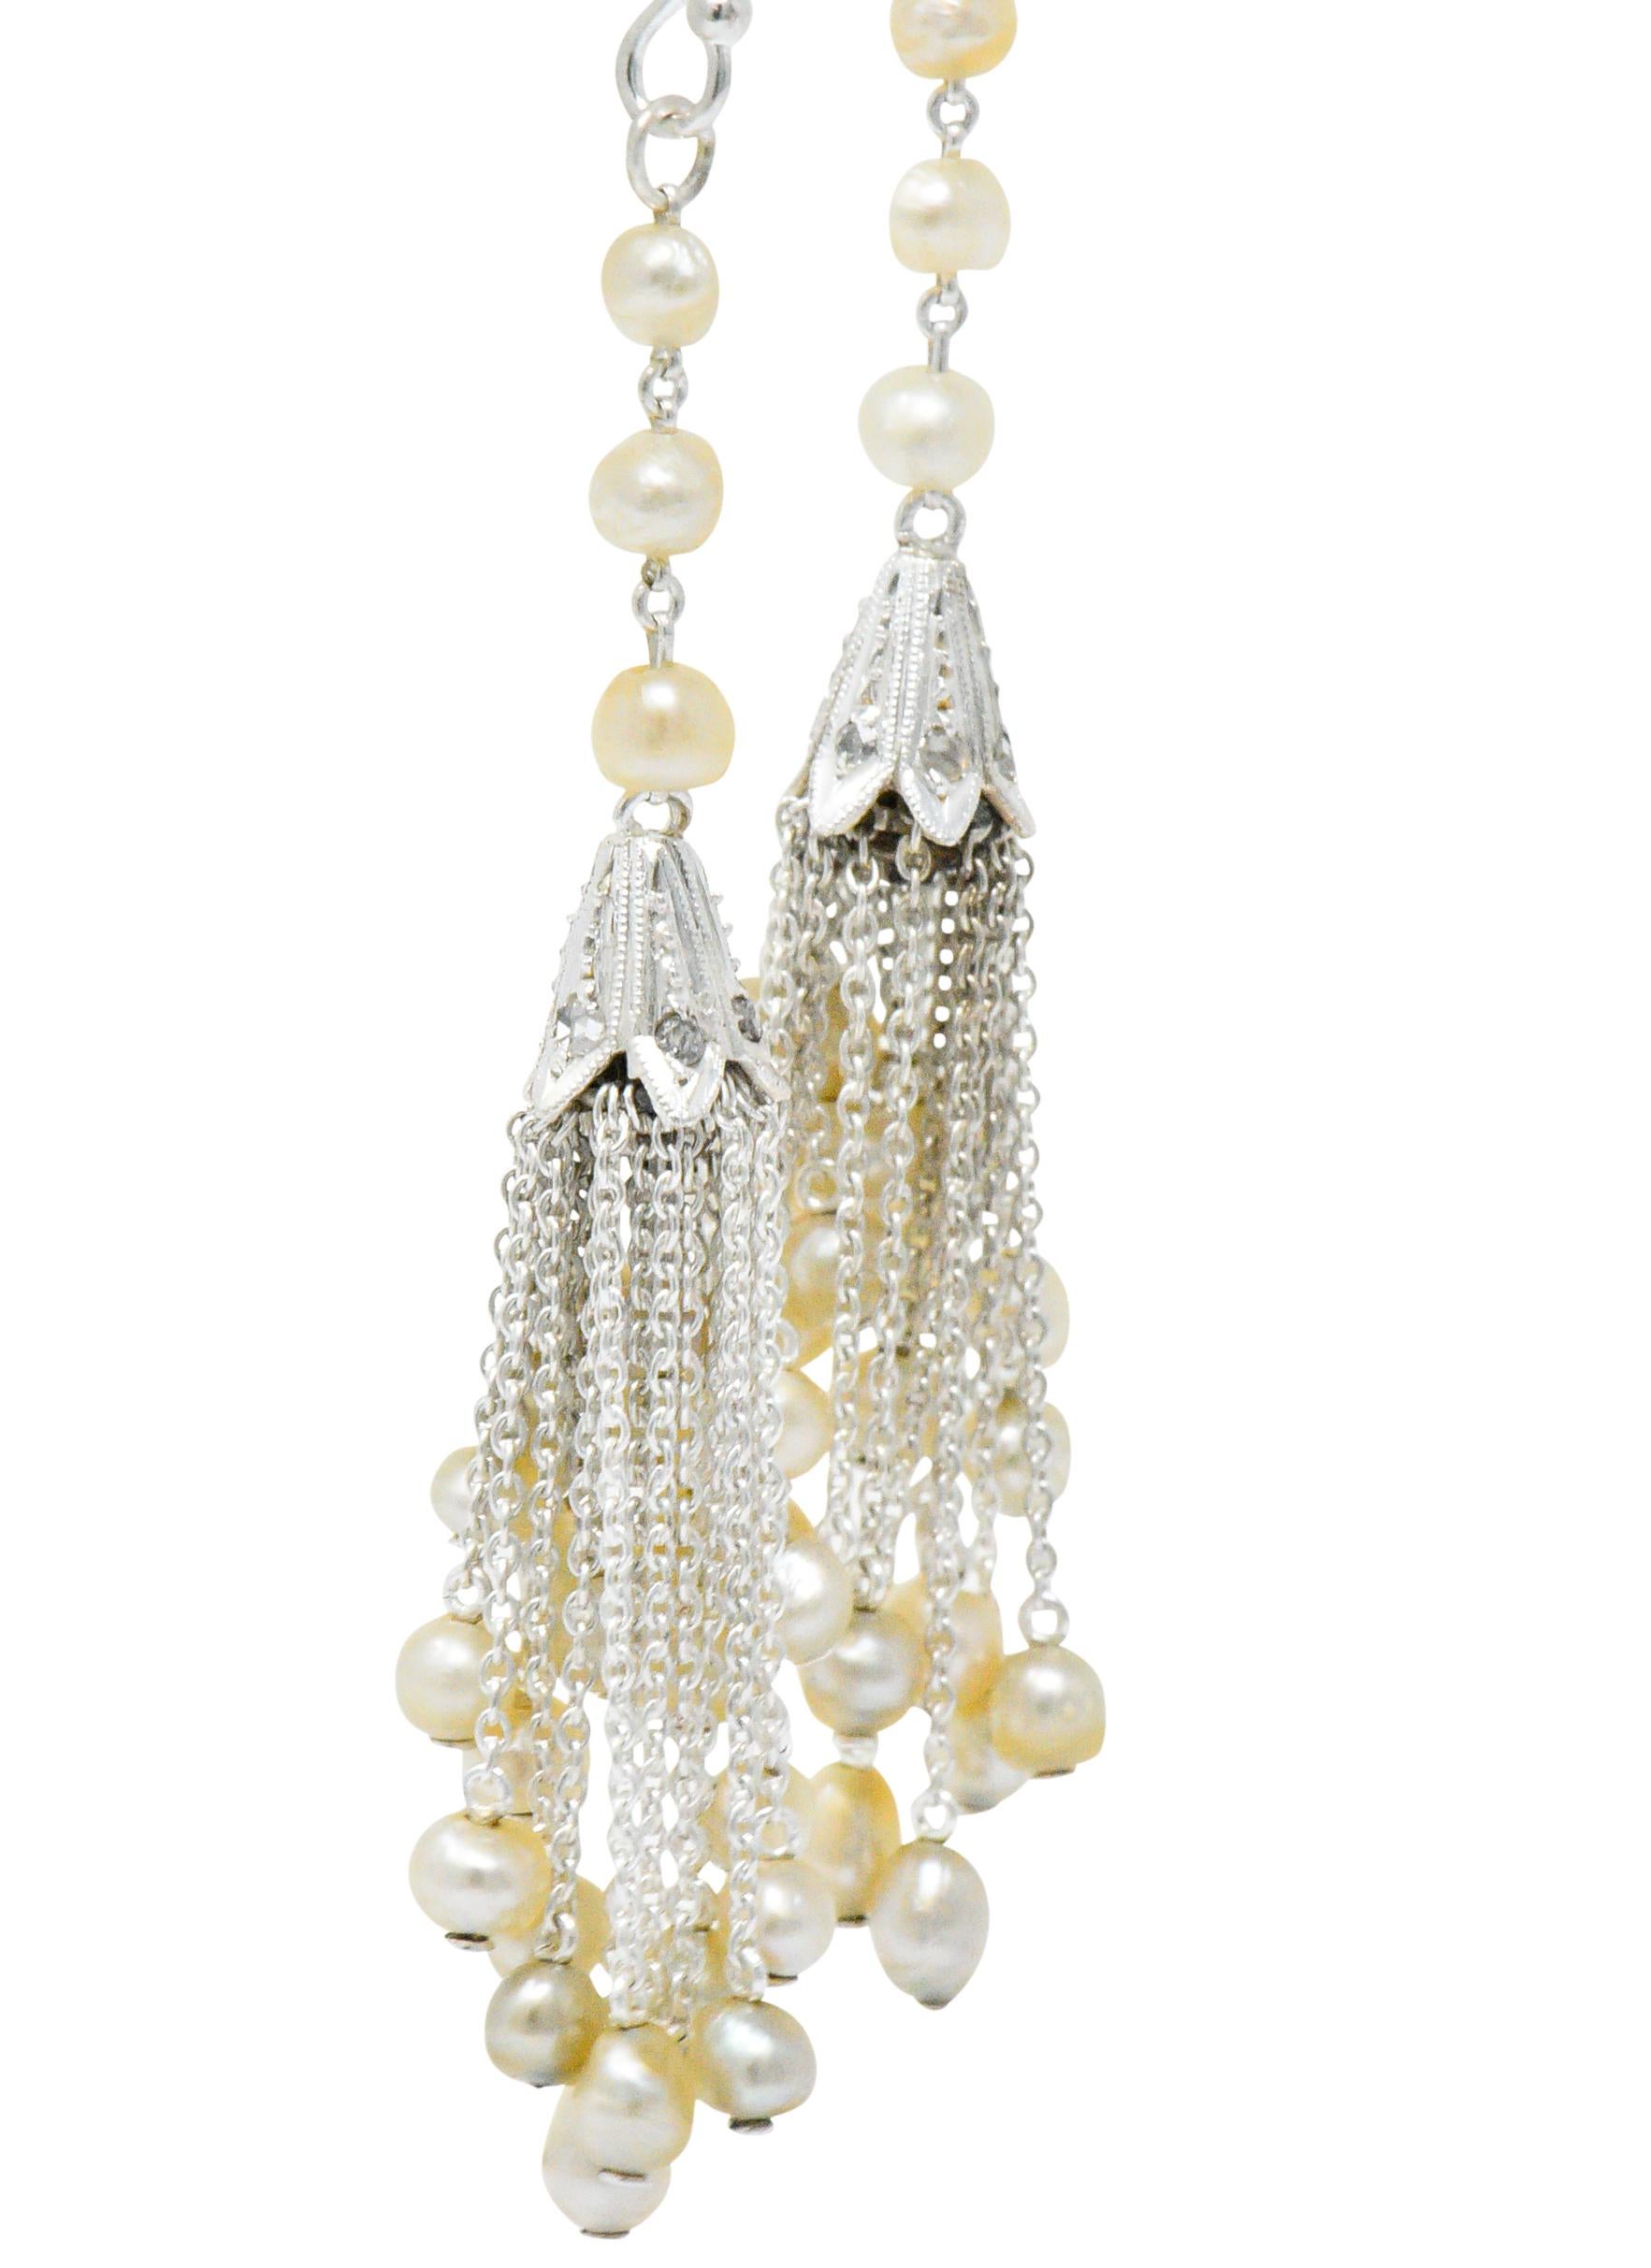 Featuring numerous chain tassels of various lengths terminating in a seed pearl

Descending from a seed pearl chain into a cap set with rose cut diamonds

With 14 karat white gold French hooks

Length: Approx. 2 1/2 Inches

Total Weigh: 6.5